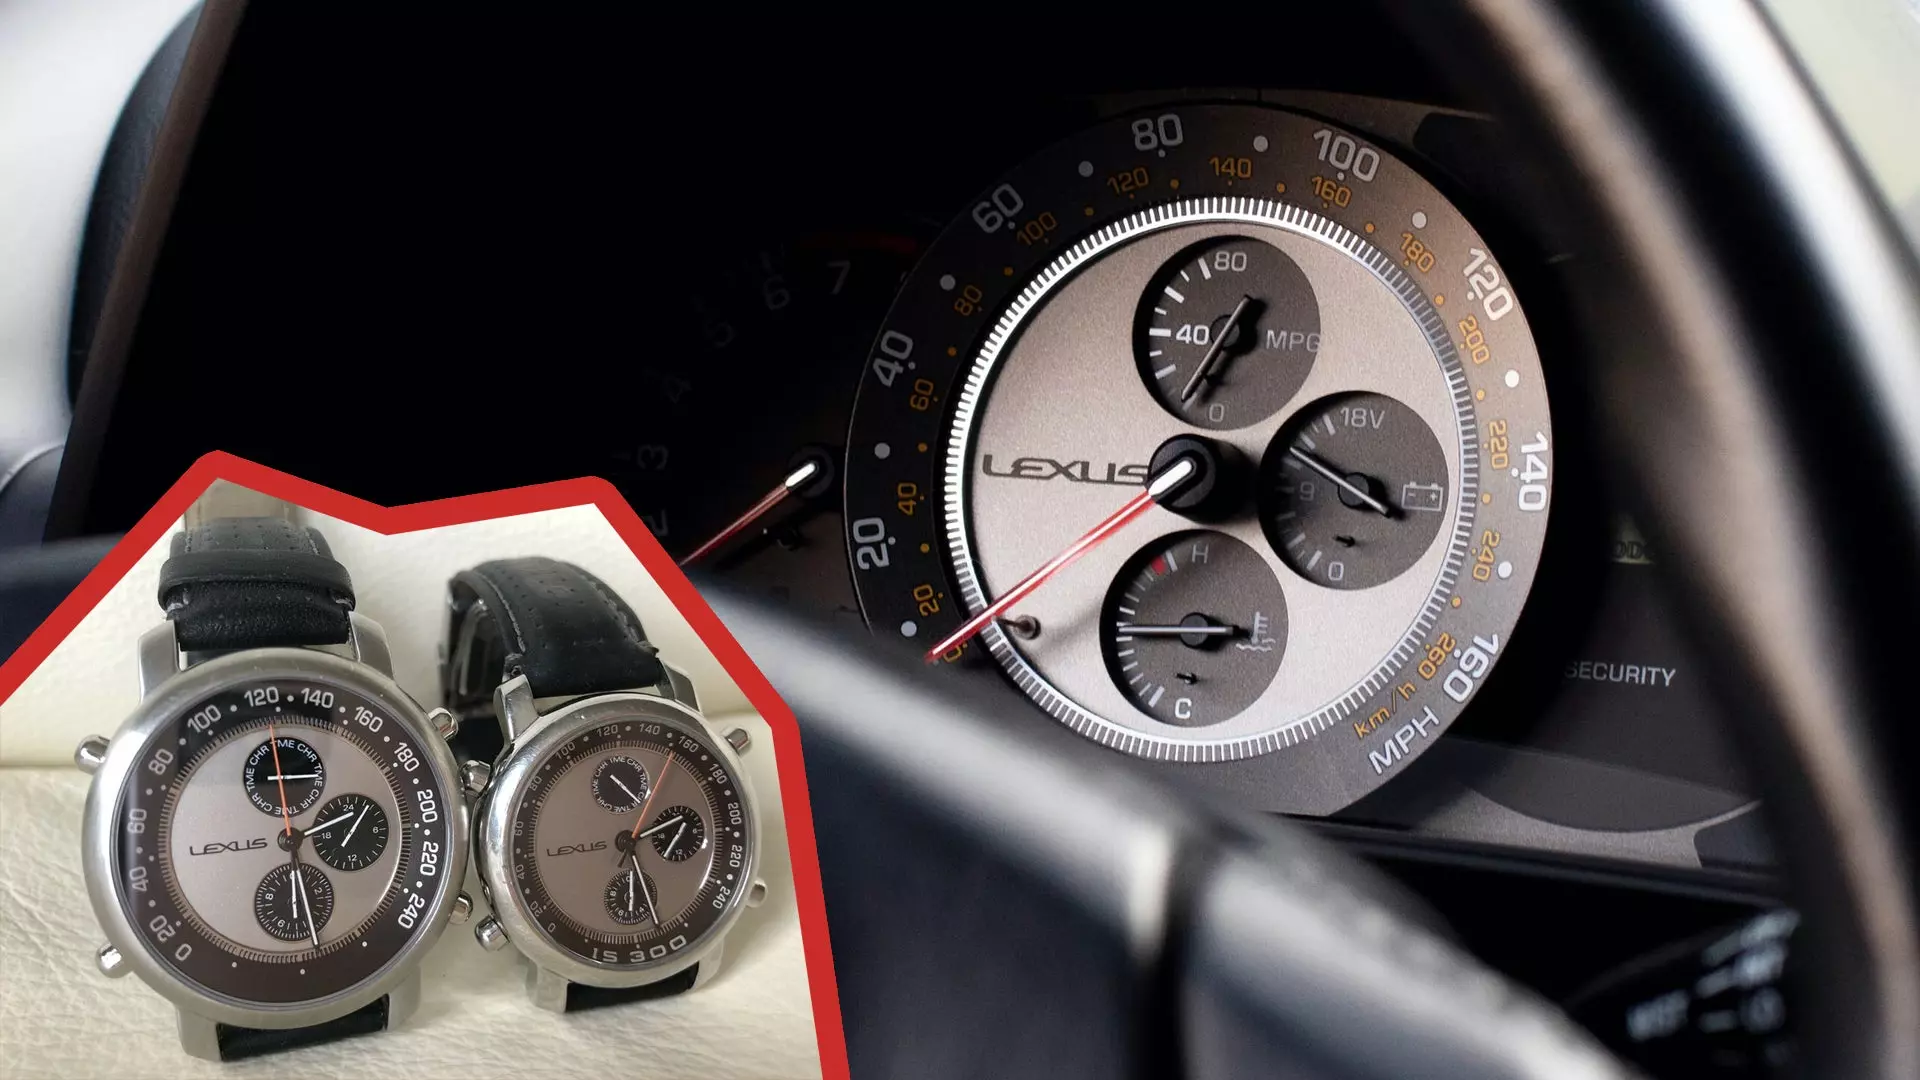 Lexus Was So Proud of the IS300 Gauge Cluster It Made Watches and Wall Clocks To Match | Autance